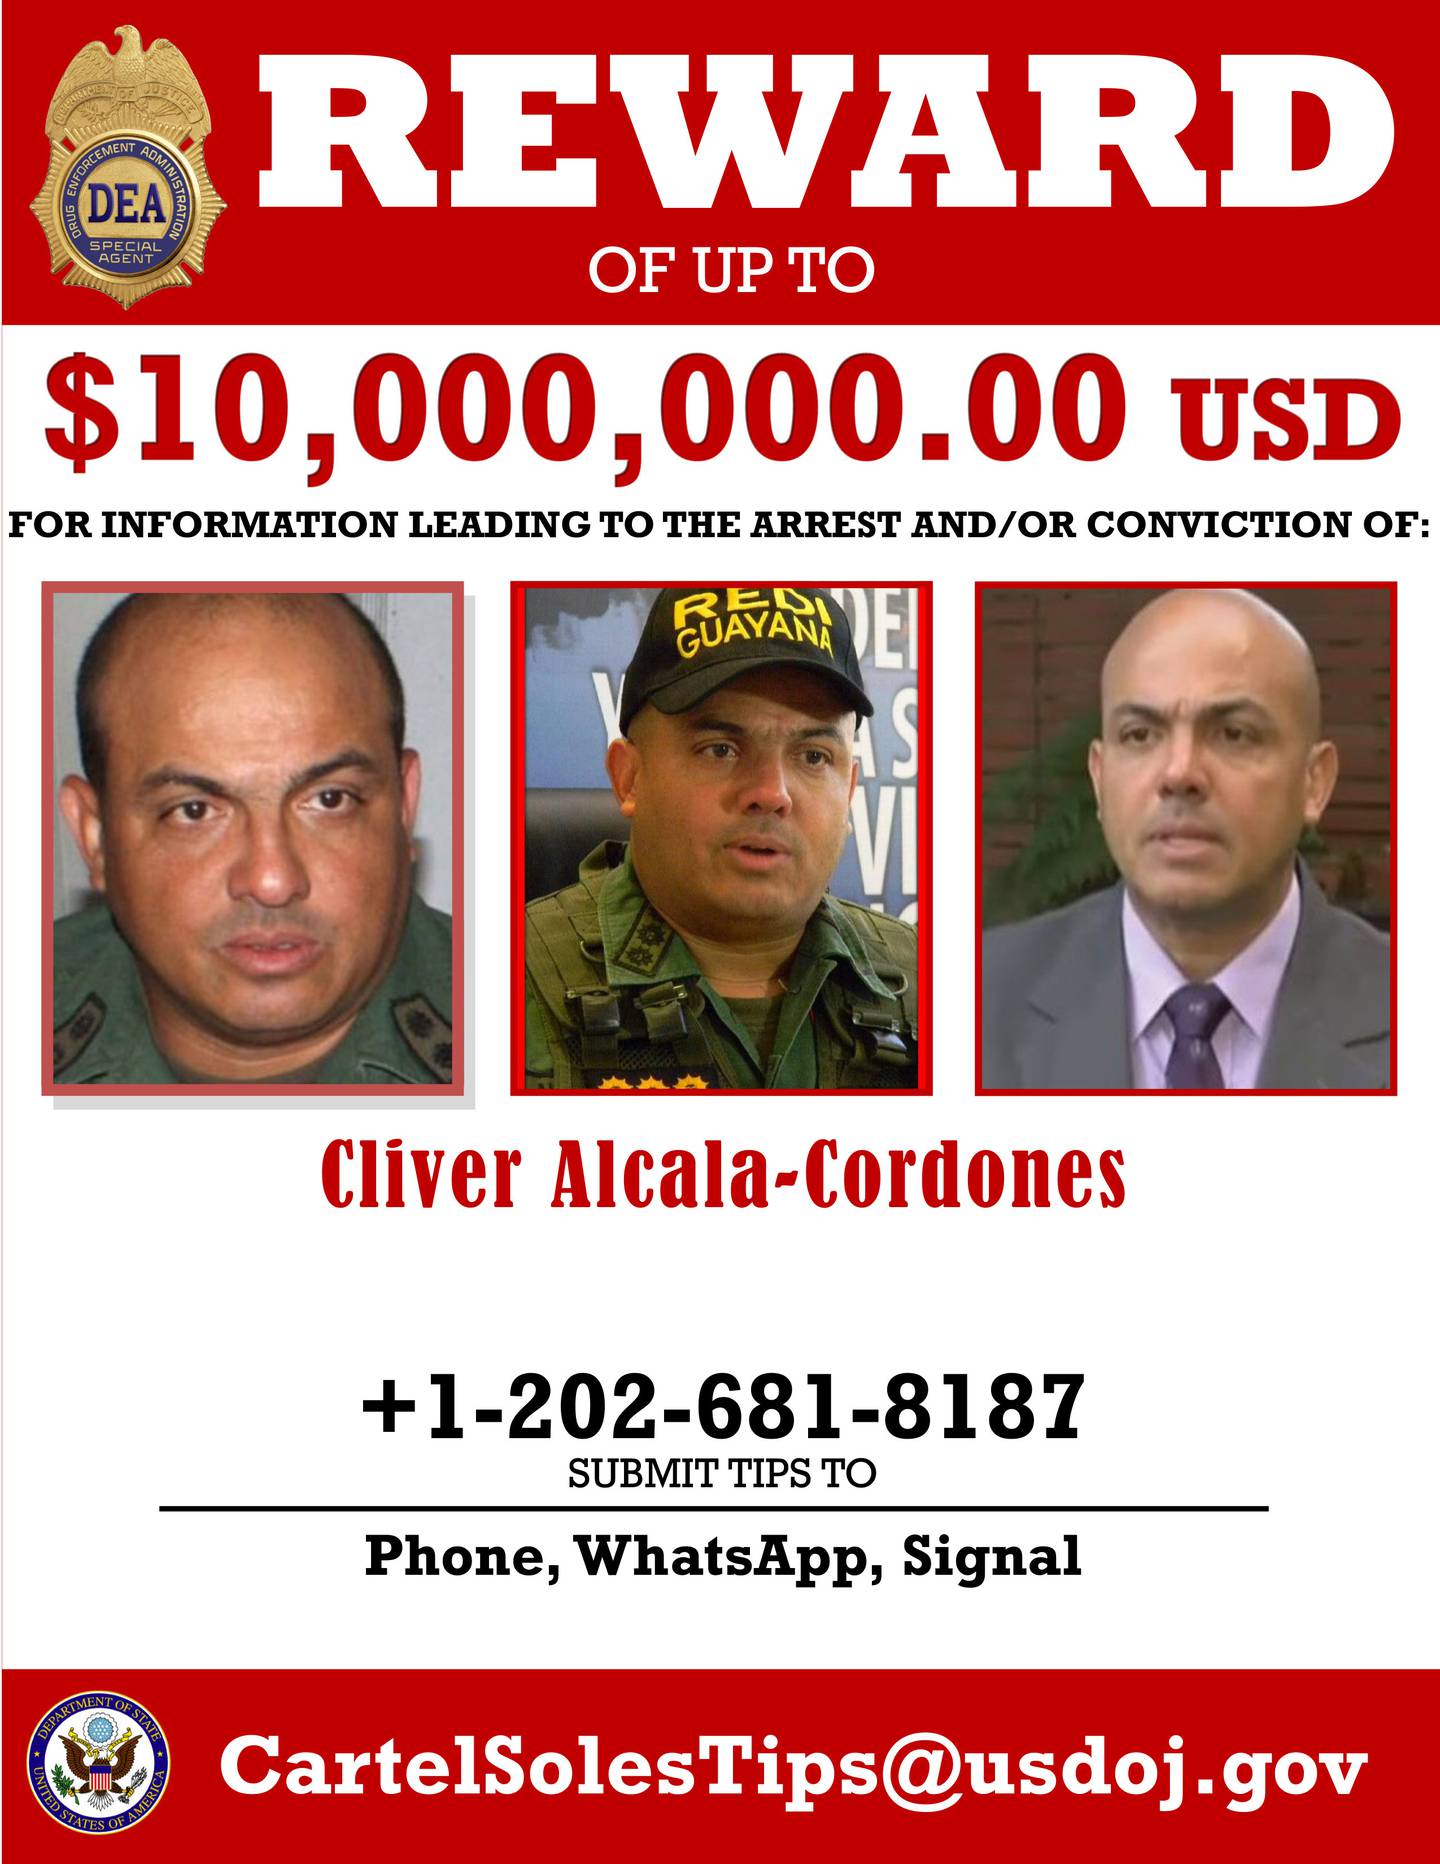 This image provided by the U.S. Department of Justice shows a reward poster for Cliver Alcala-Cordones that was released on March 26, 2020, as part of a federal indictment charging him and others in a conspiracy stretching back two decades to convert Venezuela into a launch pad for flooding the U.S. with cocaine.